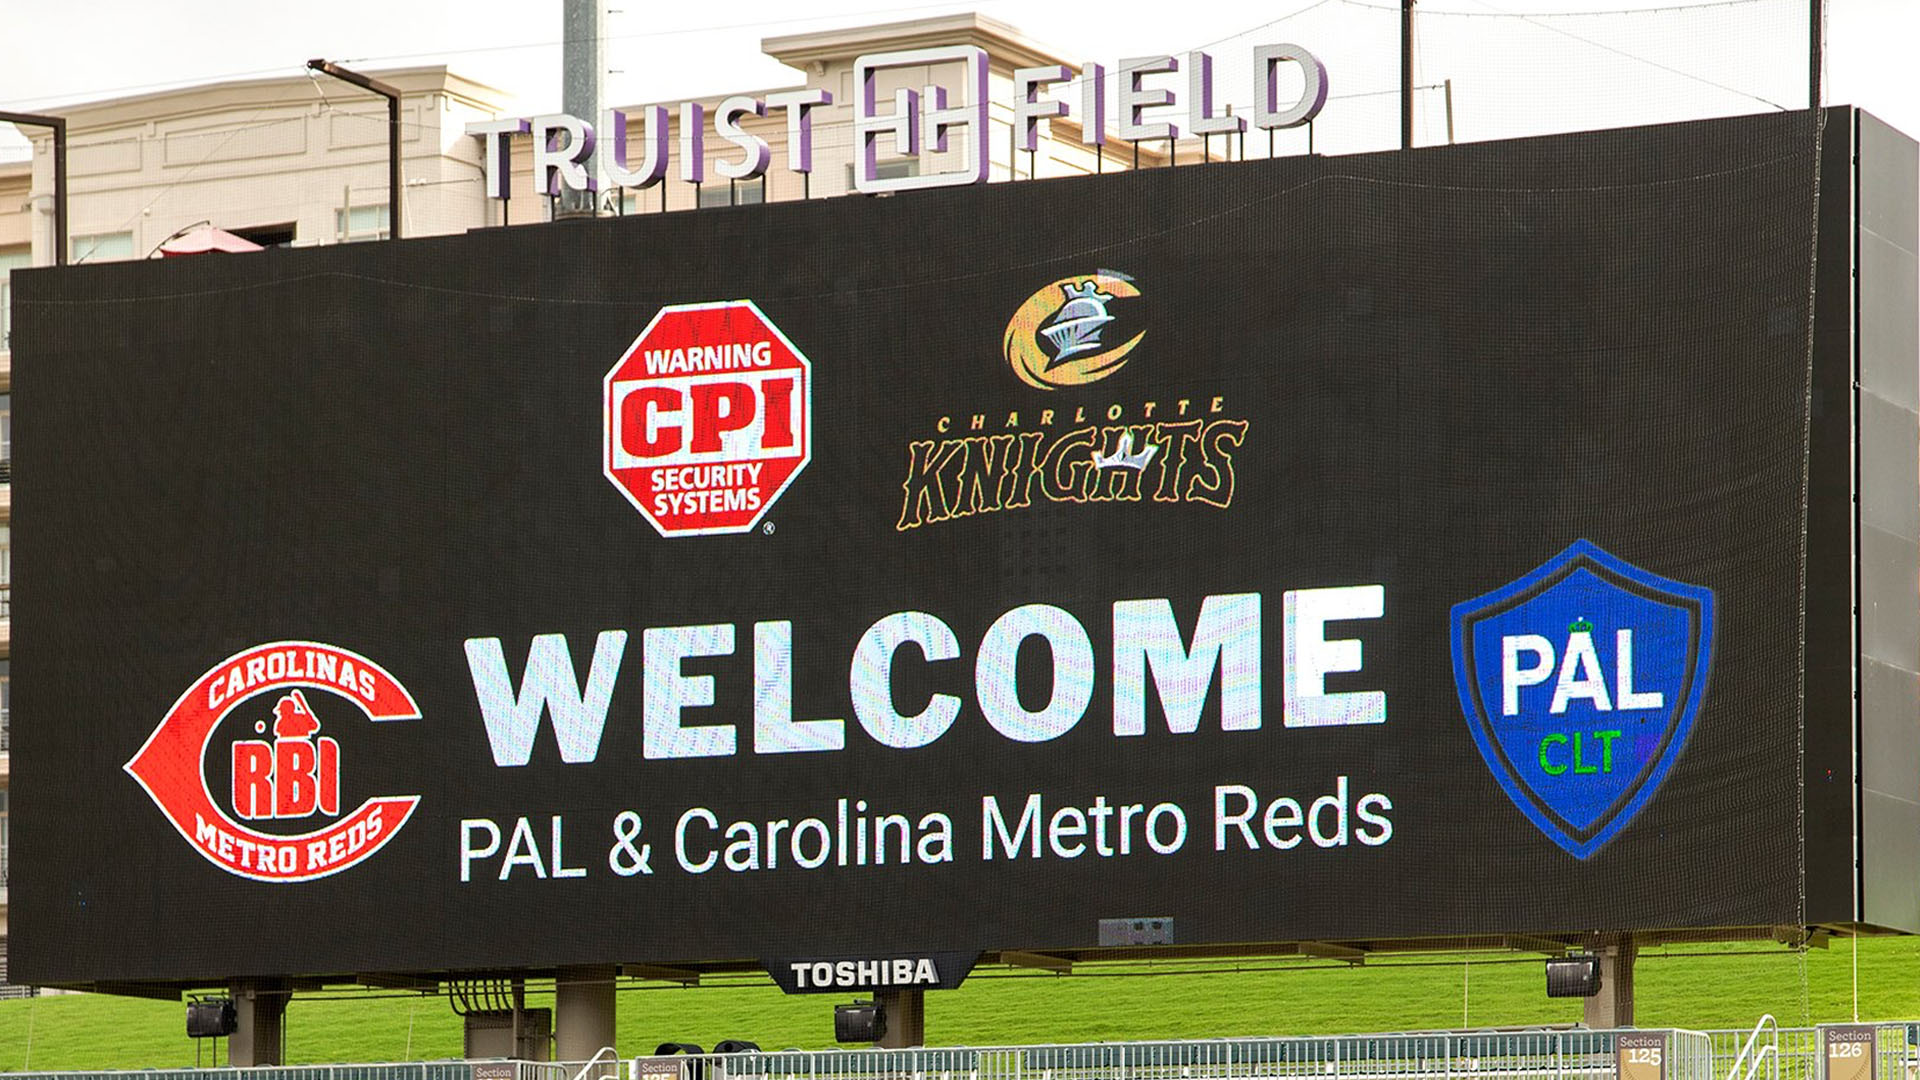 Charlotte Knights | CPI Security Blog